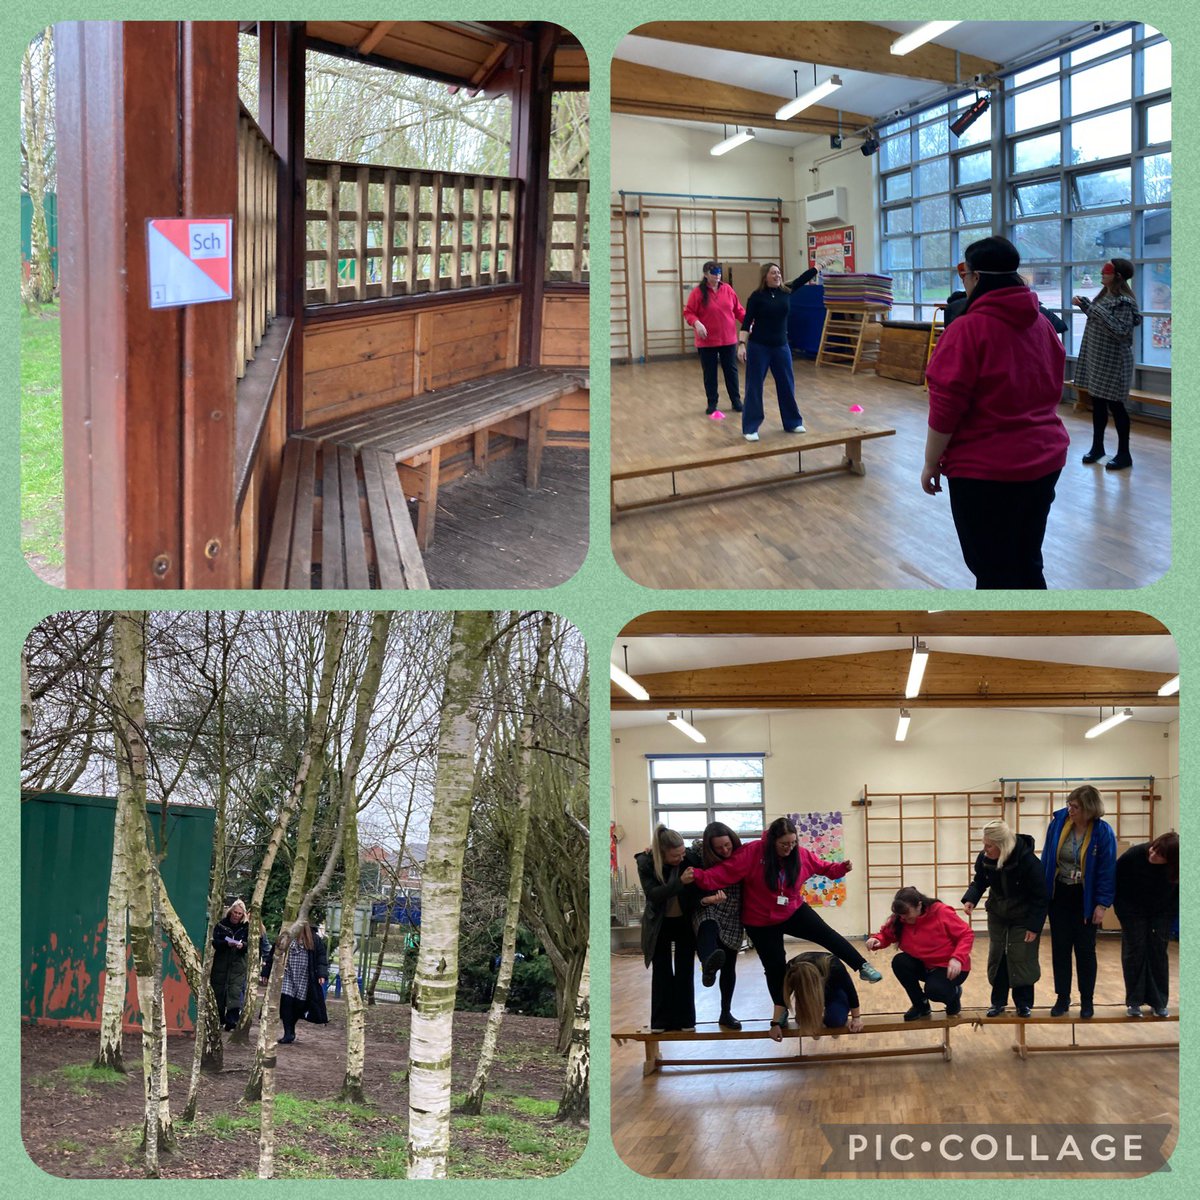 Yesterday afternoon was OAA CPD @SundridgeSchool. The staff were fantastic trying out different activities to develop key skills in this area of PE. A great start to a week with lots of CPD across the partnership going on!